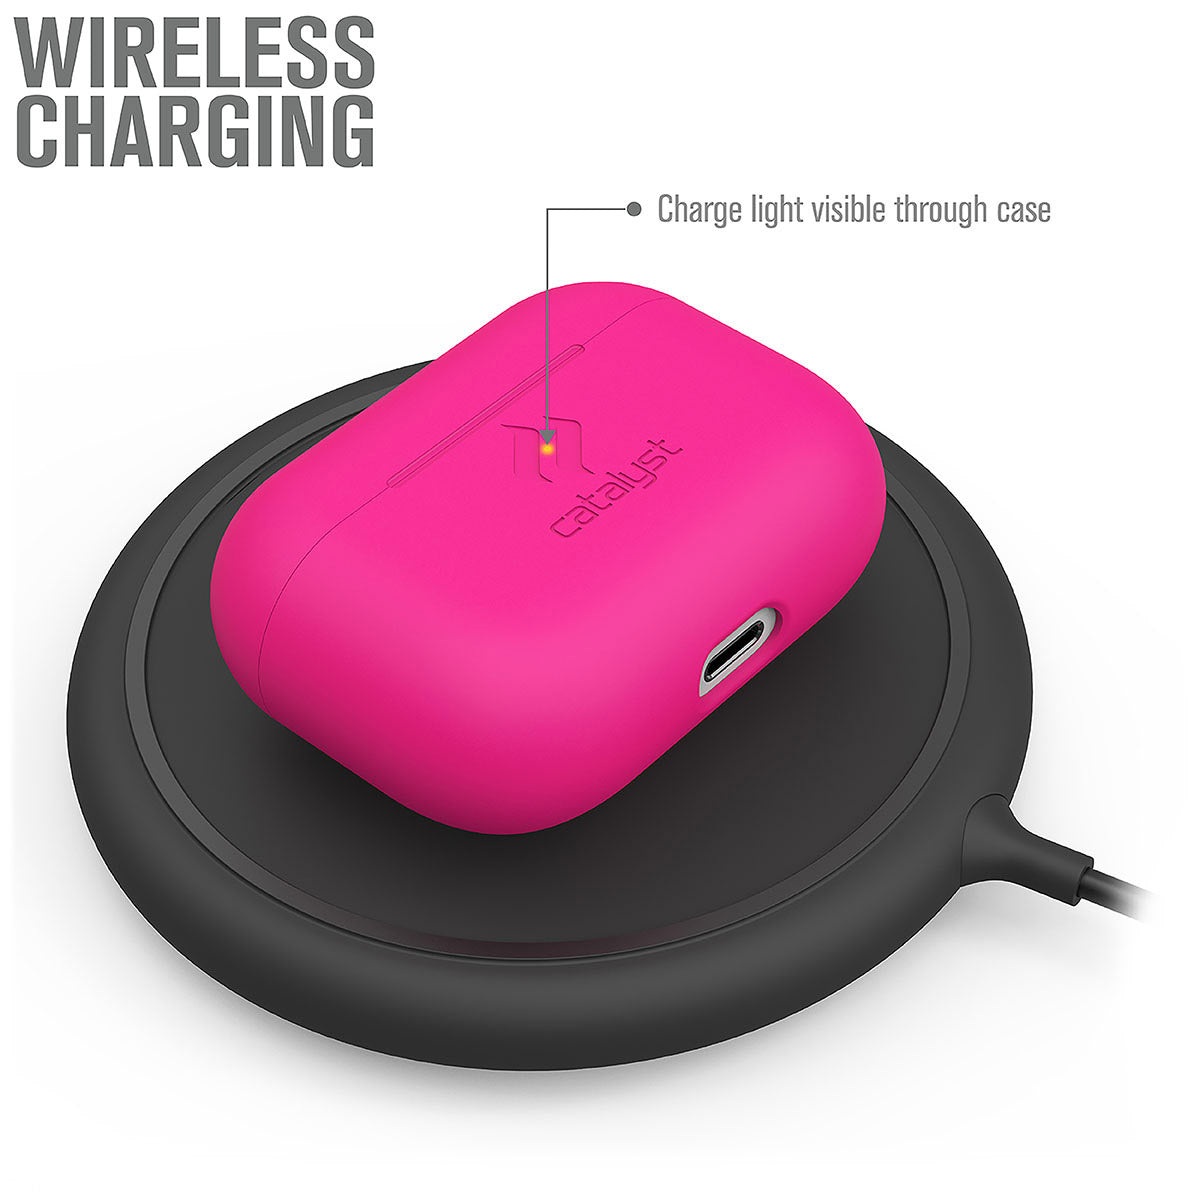 Catalyst airpods pro gen 2/1 slim case showing wireless charging of the case in a neon pink colorway